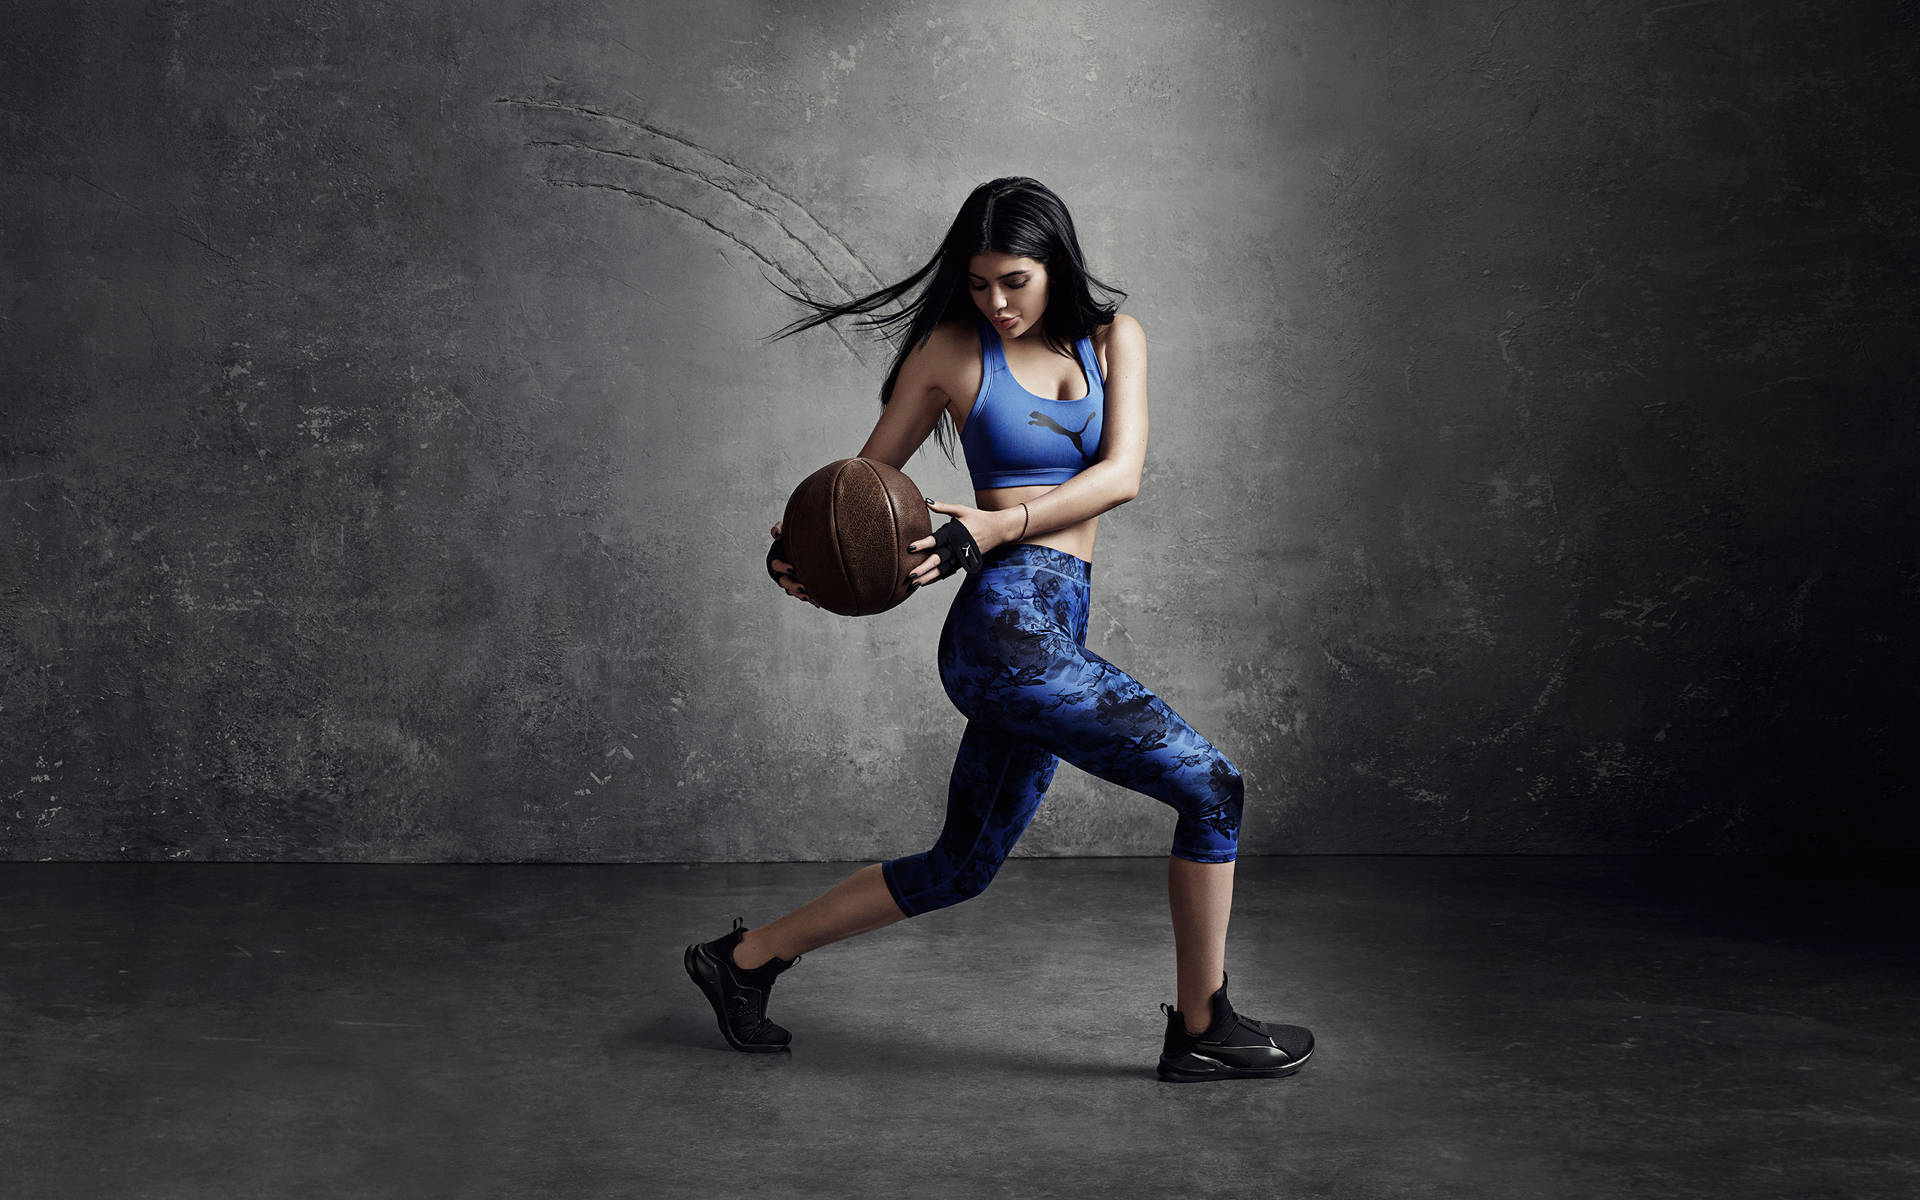 Kylie Jenner In Basketball Photoshoot Background